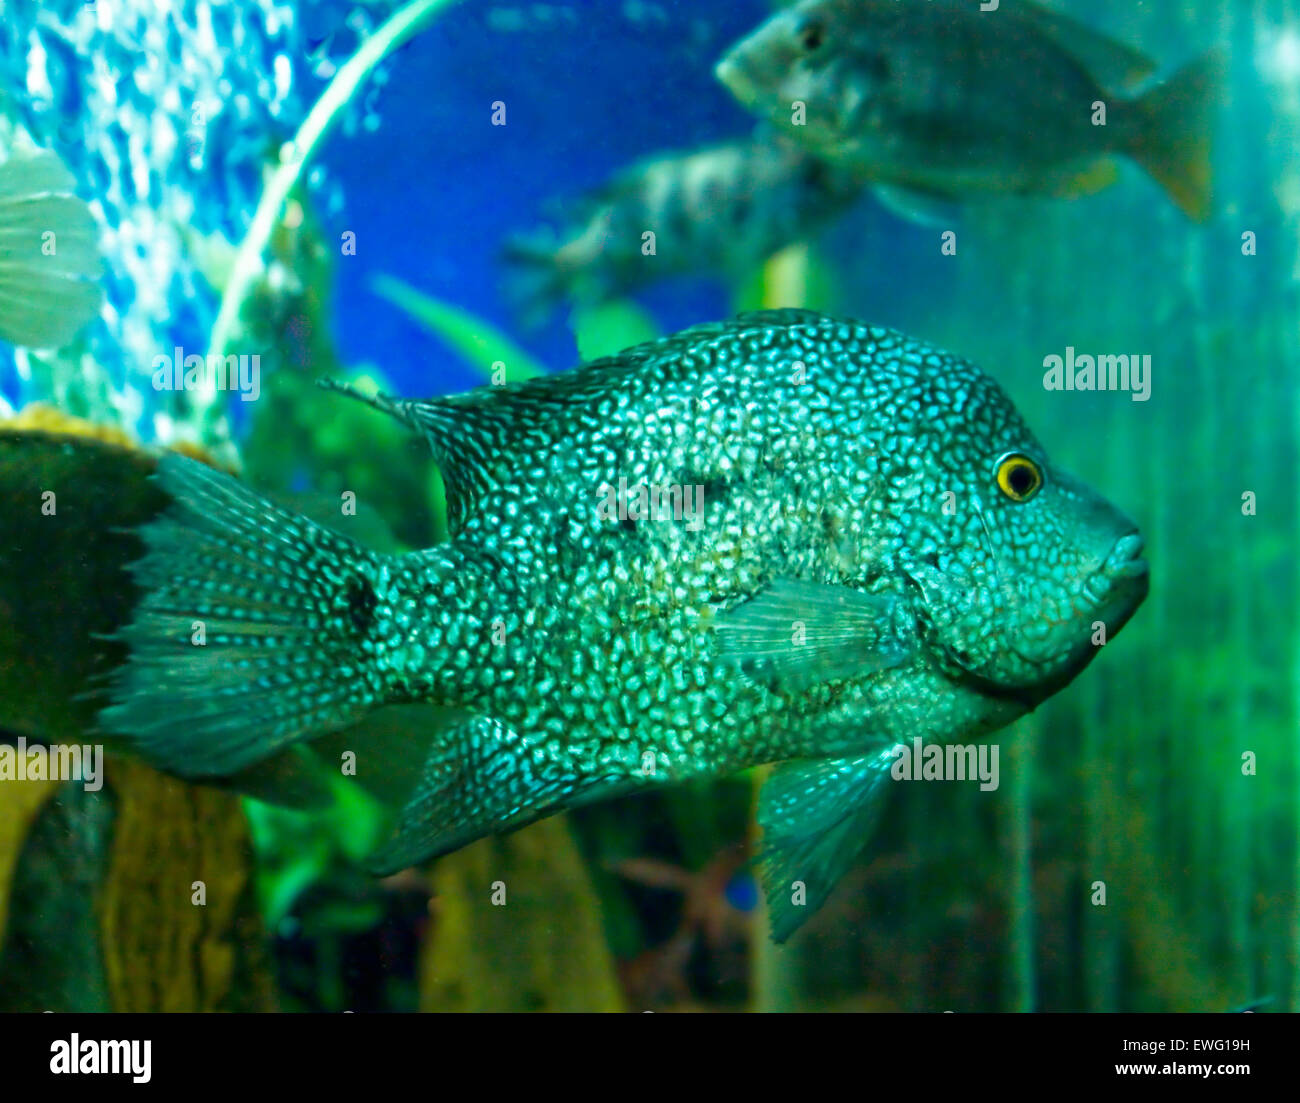 Tropical fish Paradromis managnenisis, chichlidae family, lives in Latin America and Africa Stock Photo